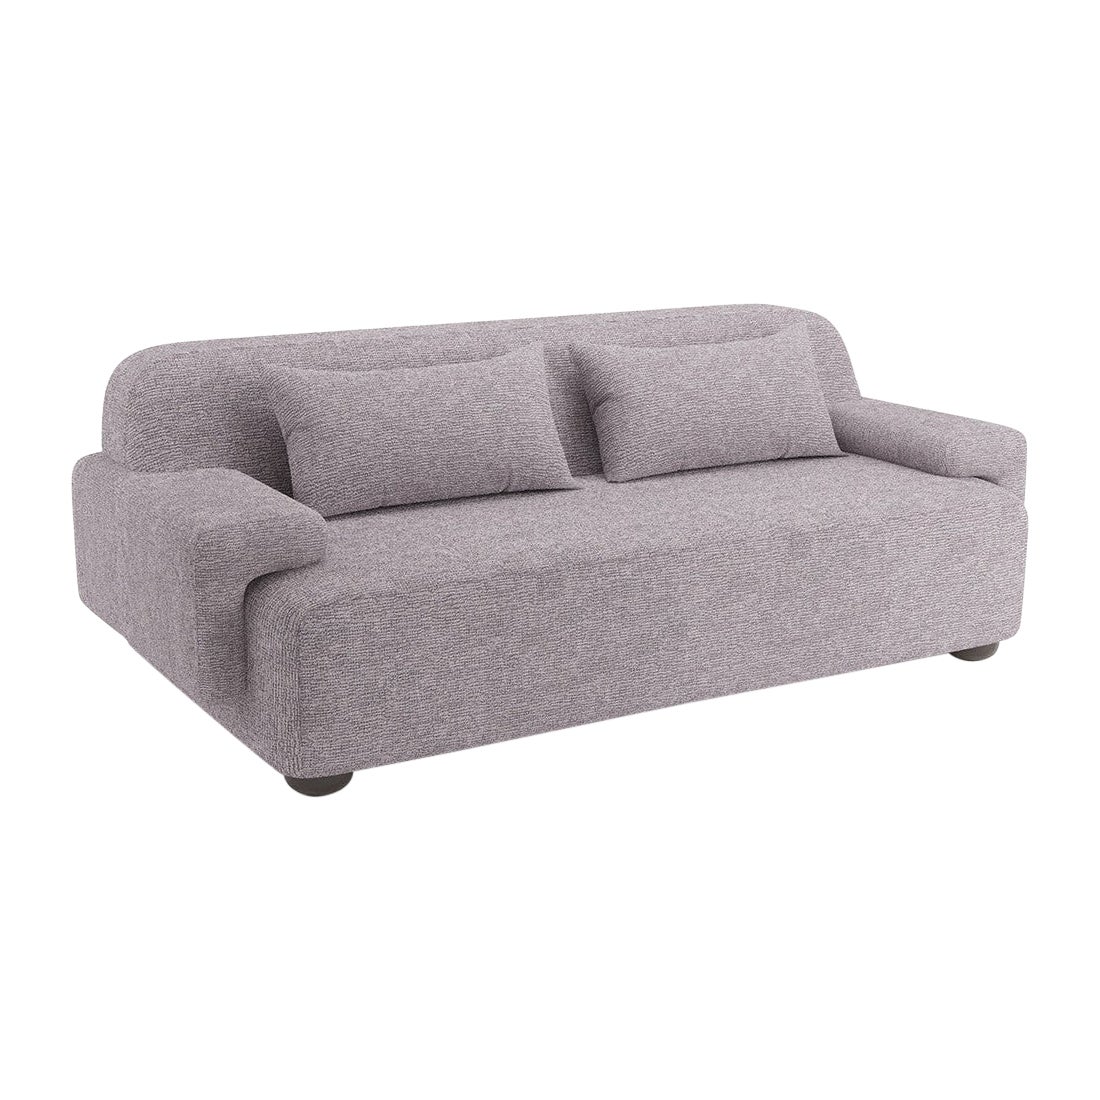 Popus Editions Lena 2.5 Seater Sofa in Mouse Megeve Fabric with Knit Effect